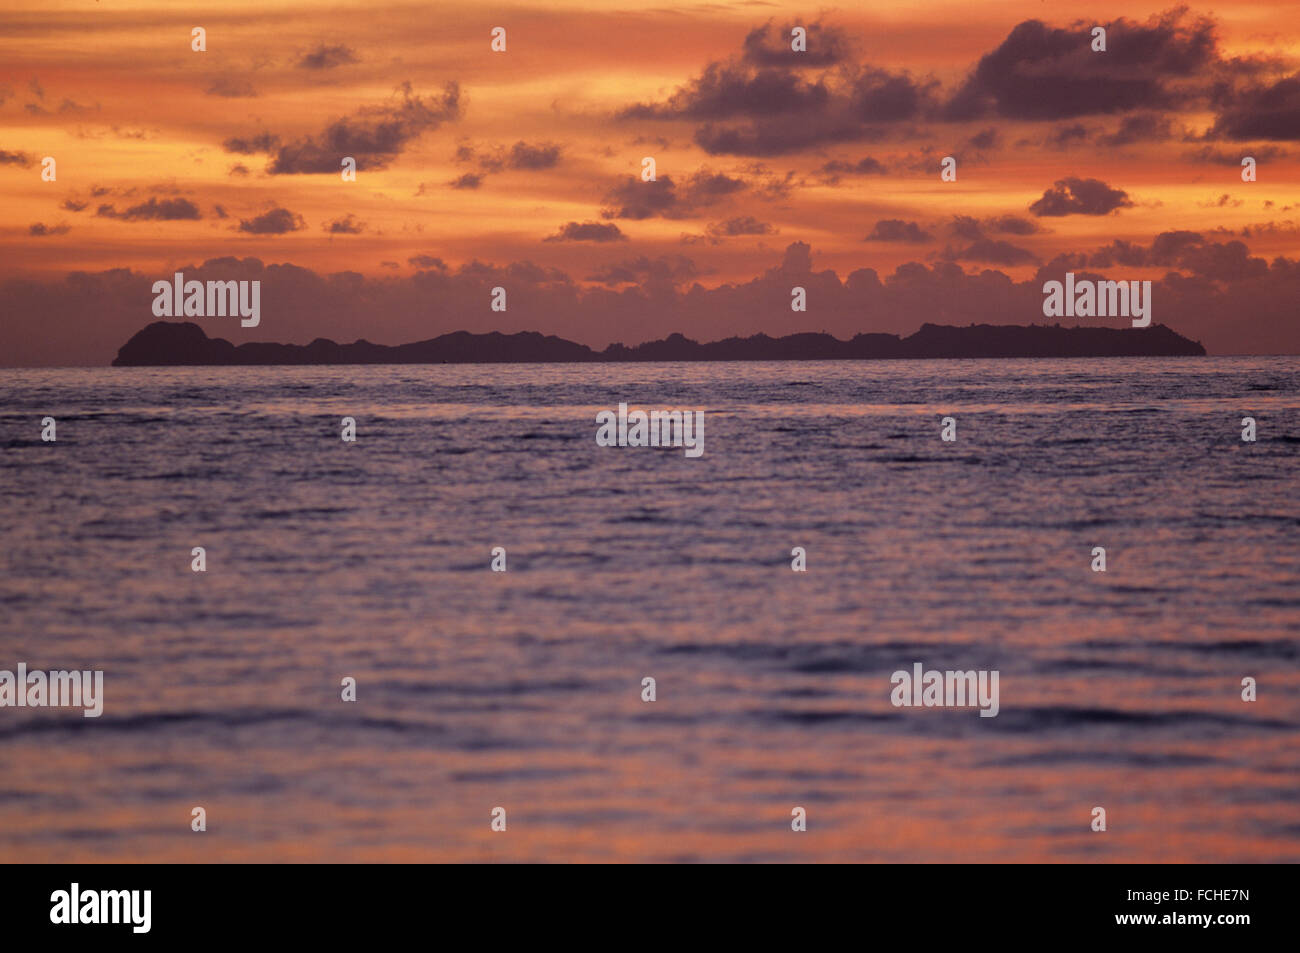 Sunset in the Republic of Palau, an island country in the western chain of the Caroline Islands, Pacific Ocean Stock Photo